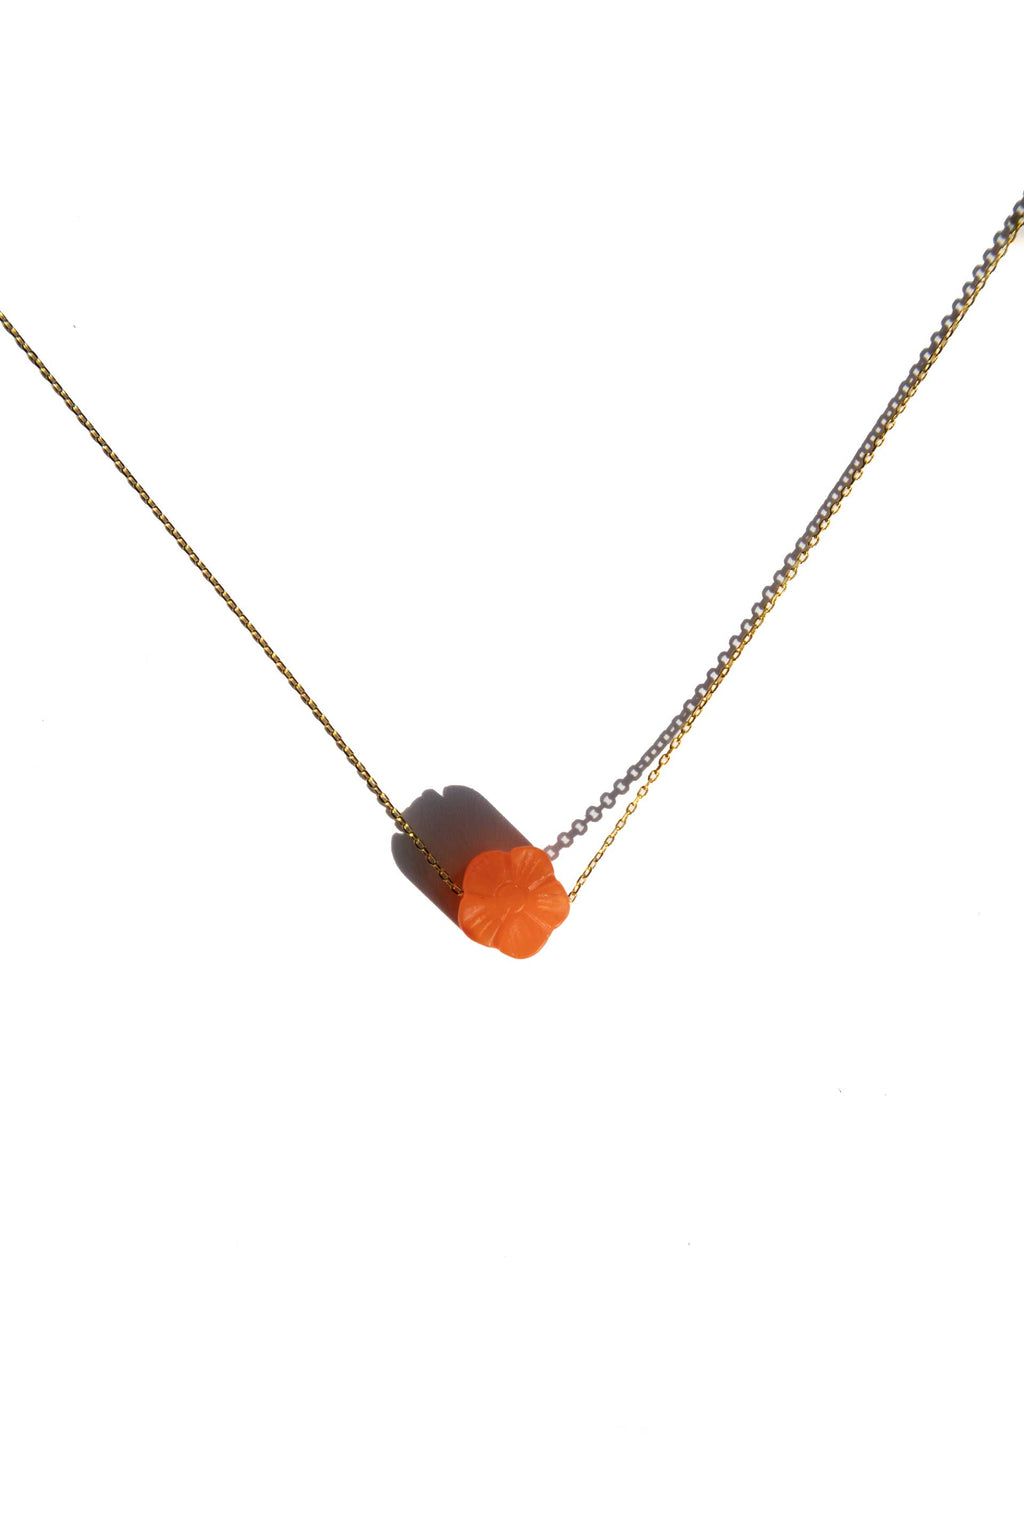 kyoto-agate-flower-pendant-with-gold-plated-necklace